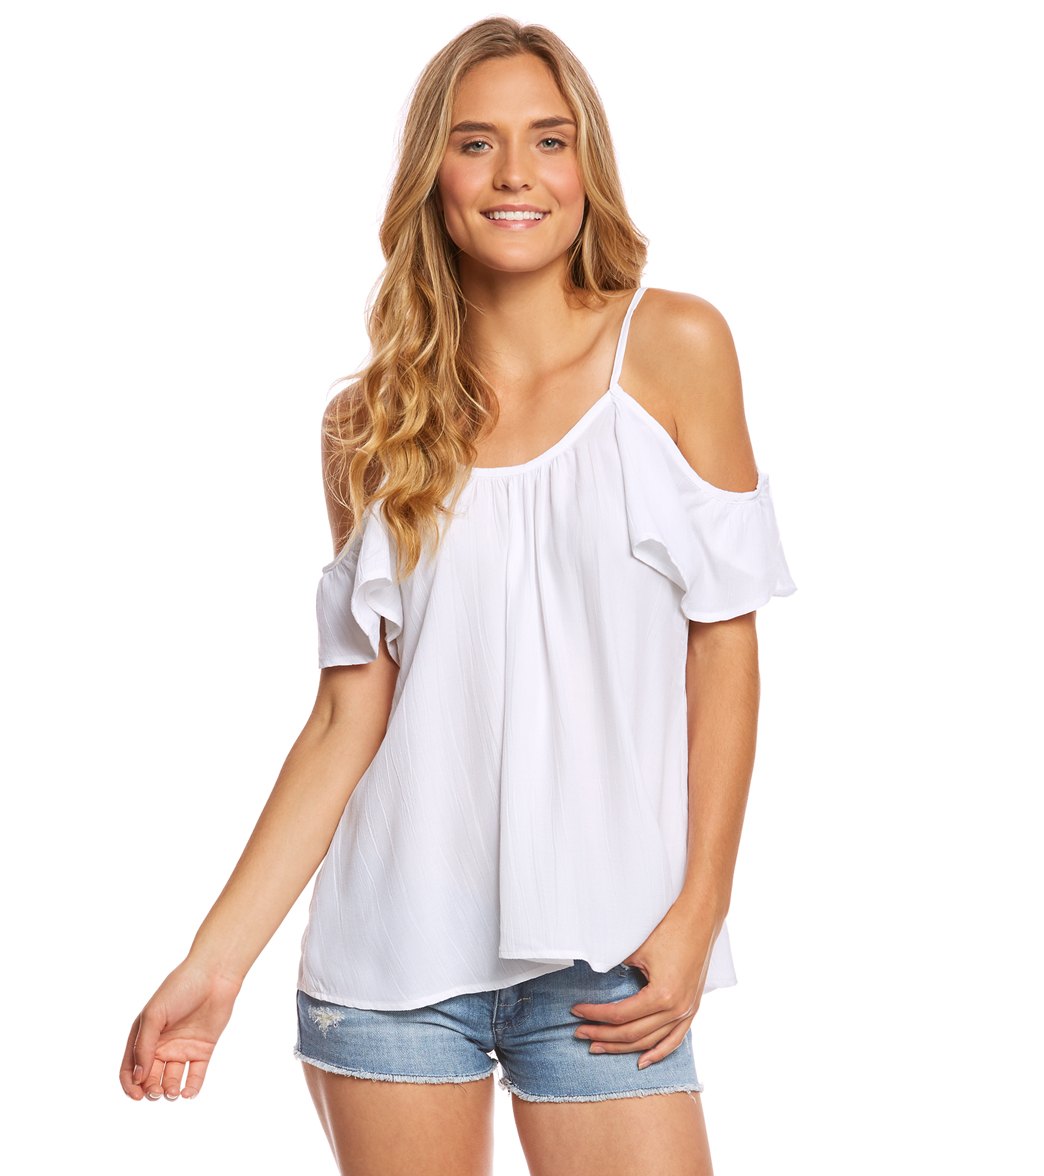 Lucy Love Up All Night Hollie Top at SwimOutlet.com